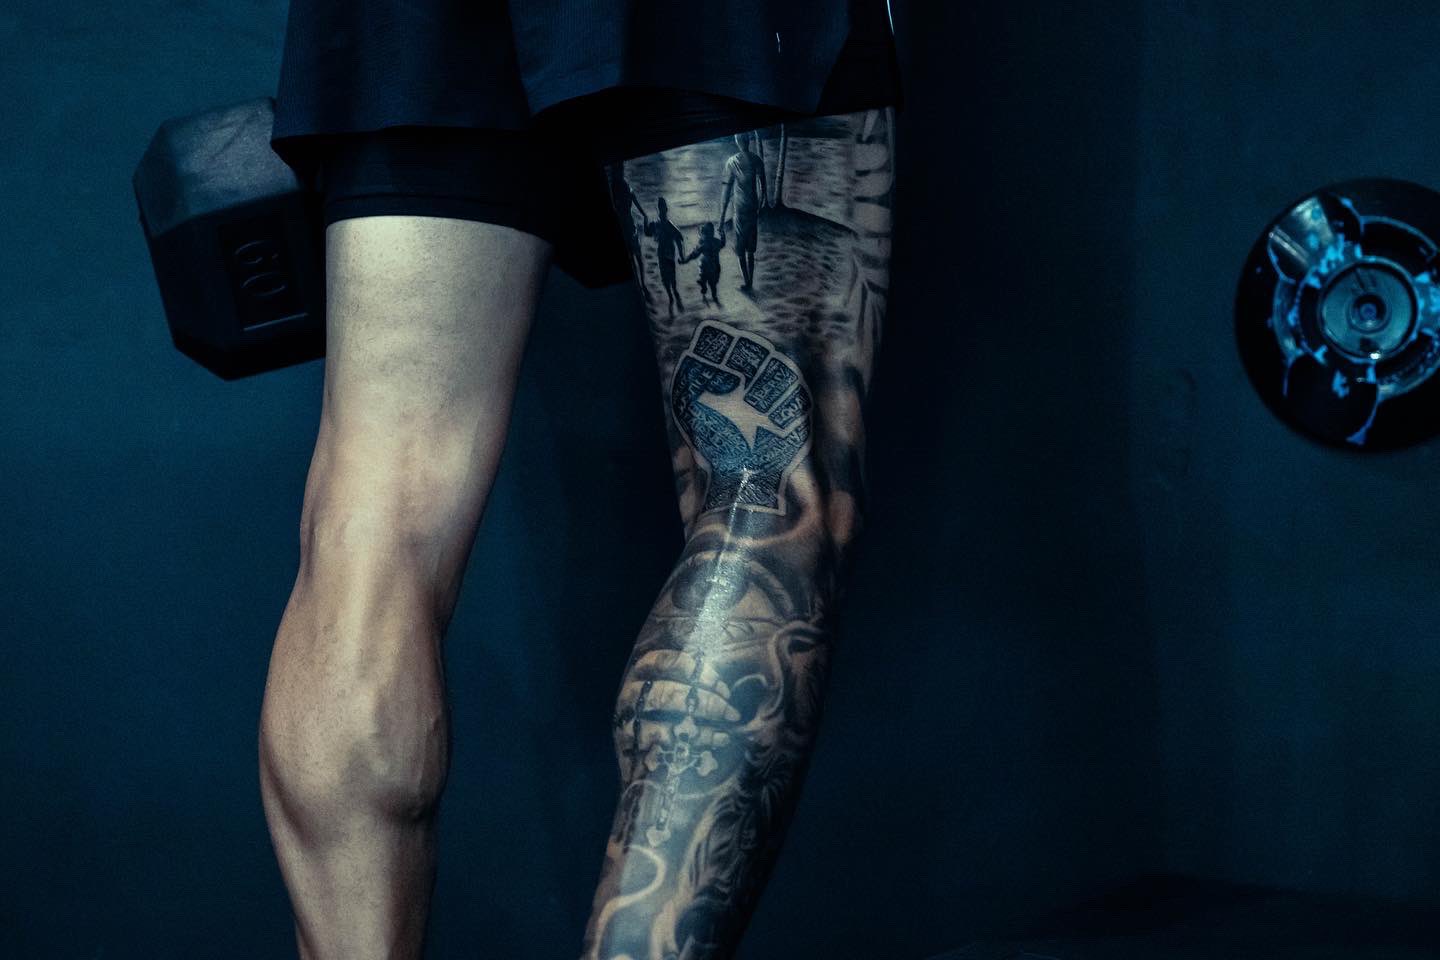 Stunning tattoos of the 2022 World Cup soccer stars  United States  KNewsMEDIA